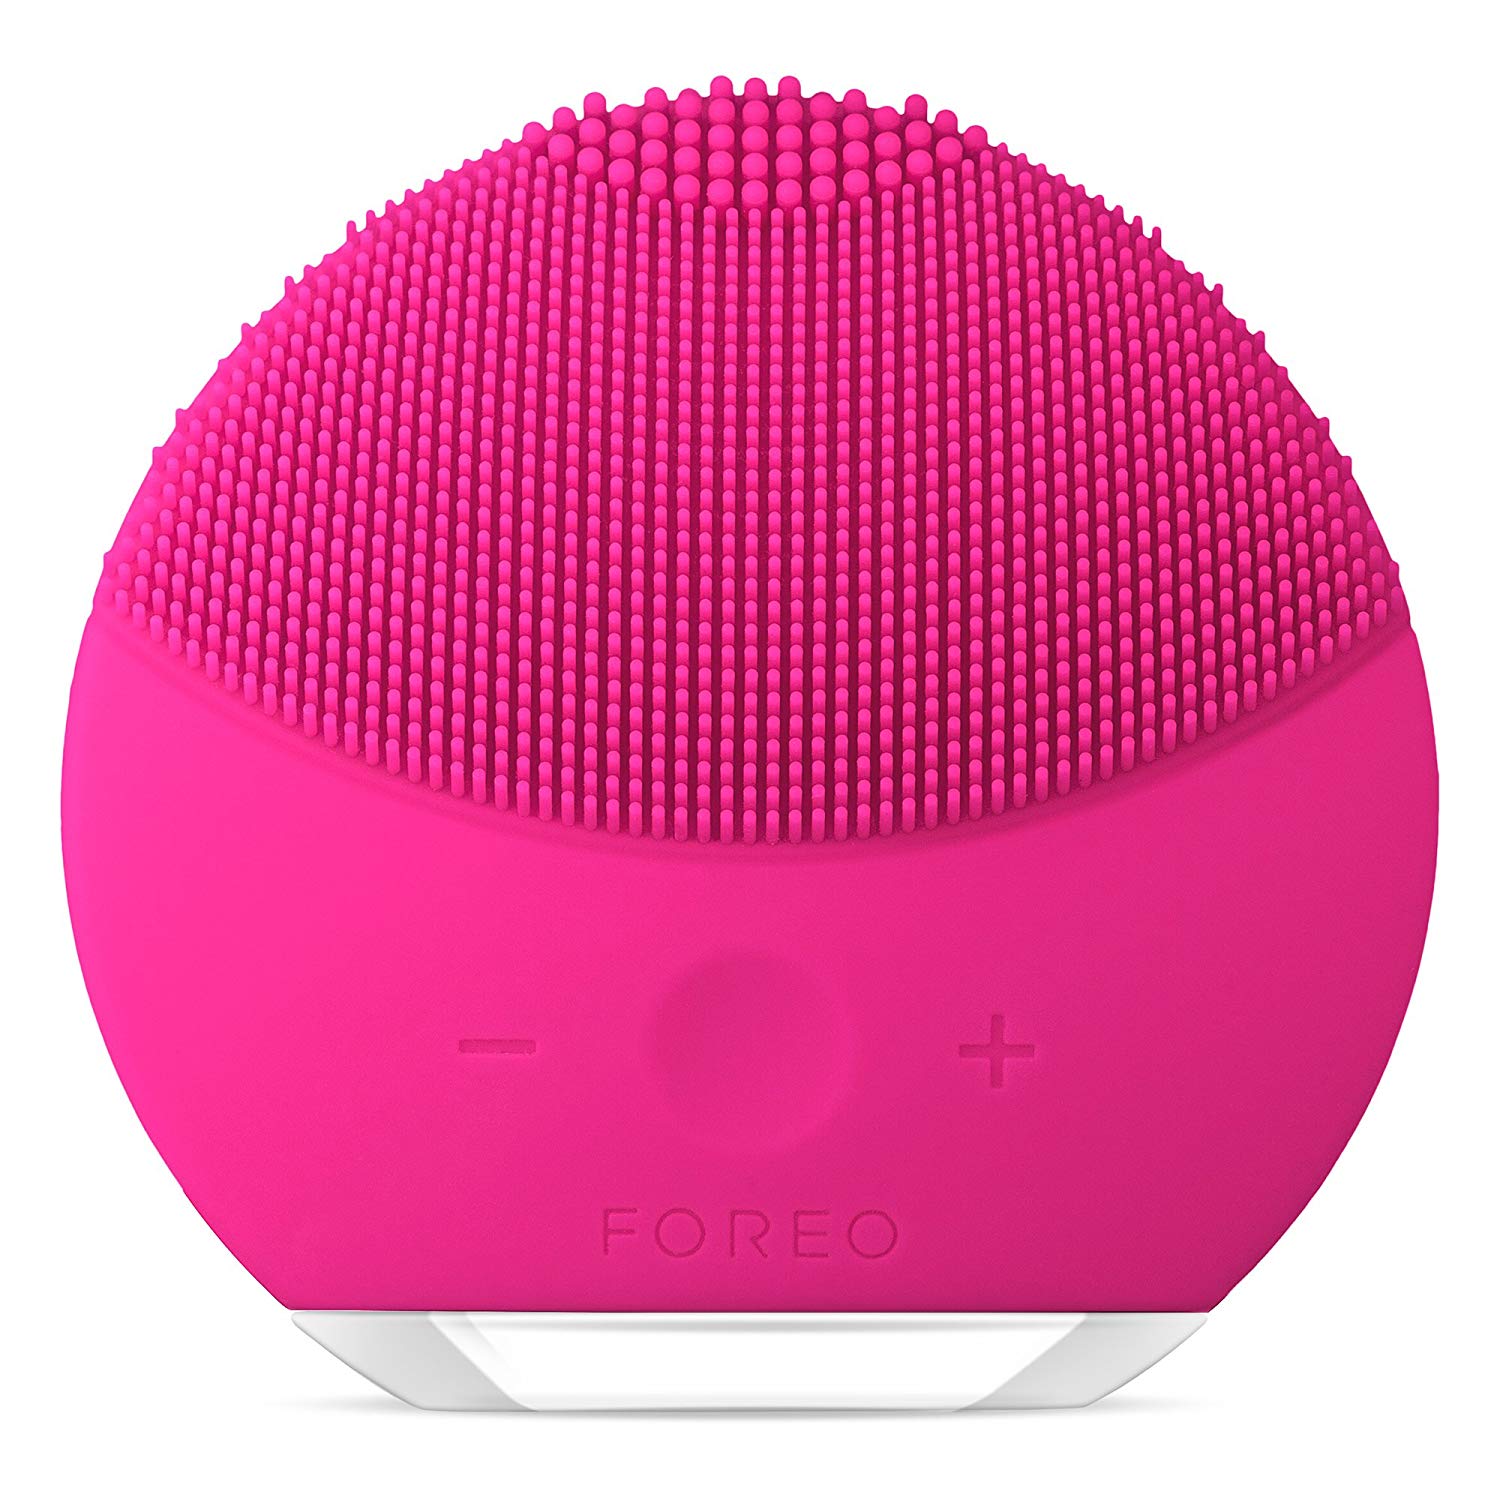 FOREO LUNA mini 2 Facial Cleansing Brush, Gentle Exfoliation and Sonic Cleansing for All Skin Types, Only $71.40, free shipping